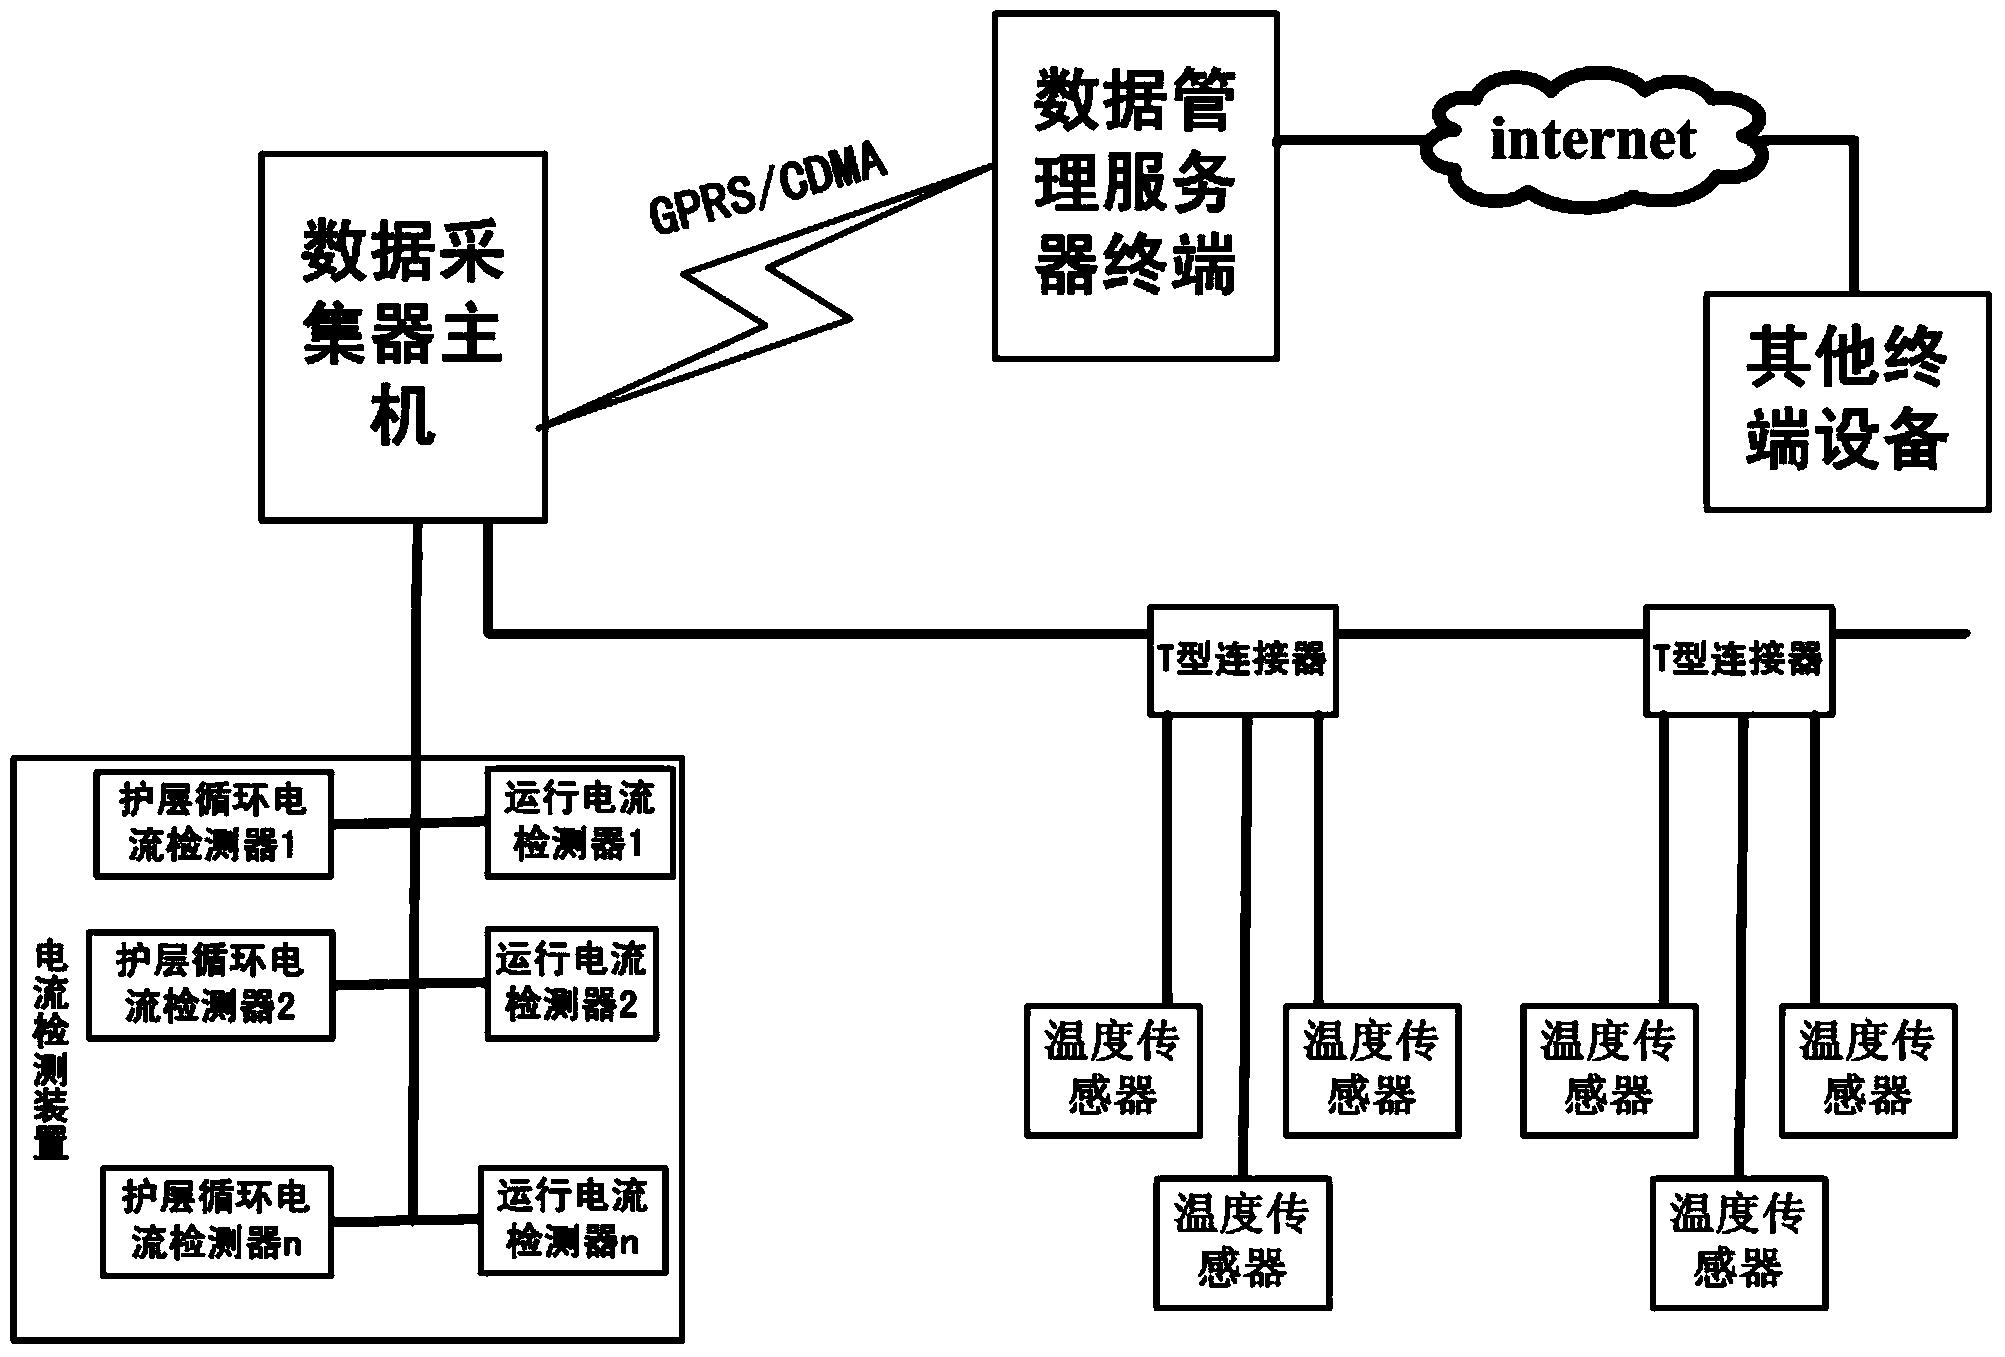 Online monitoring system for temperature and current carrying capacity of power cable